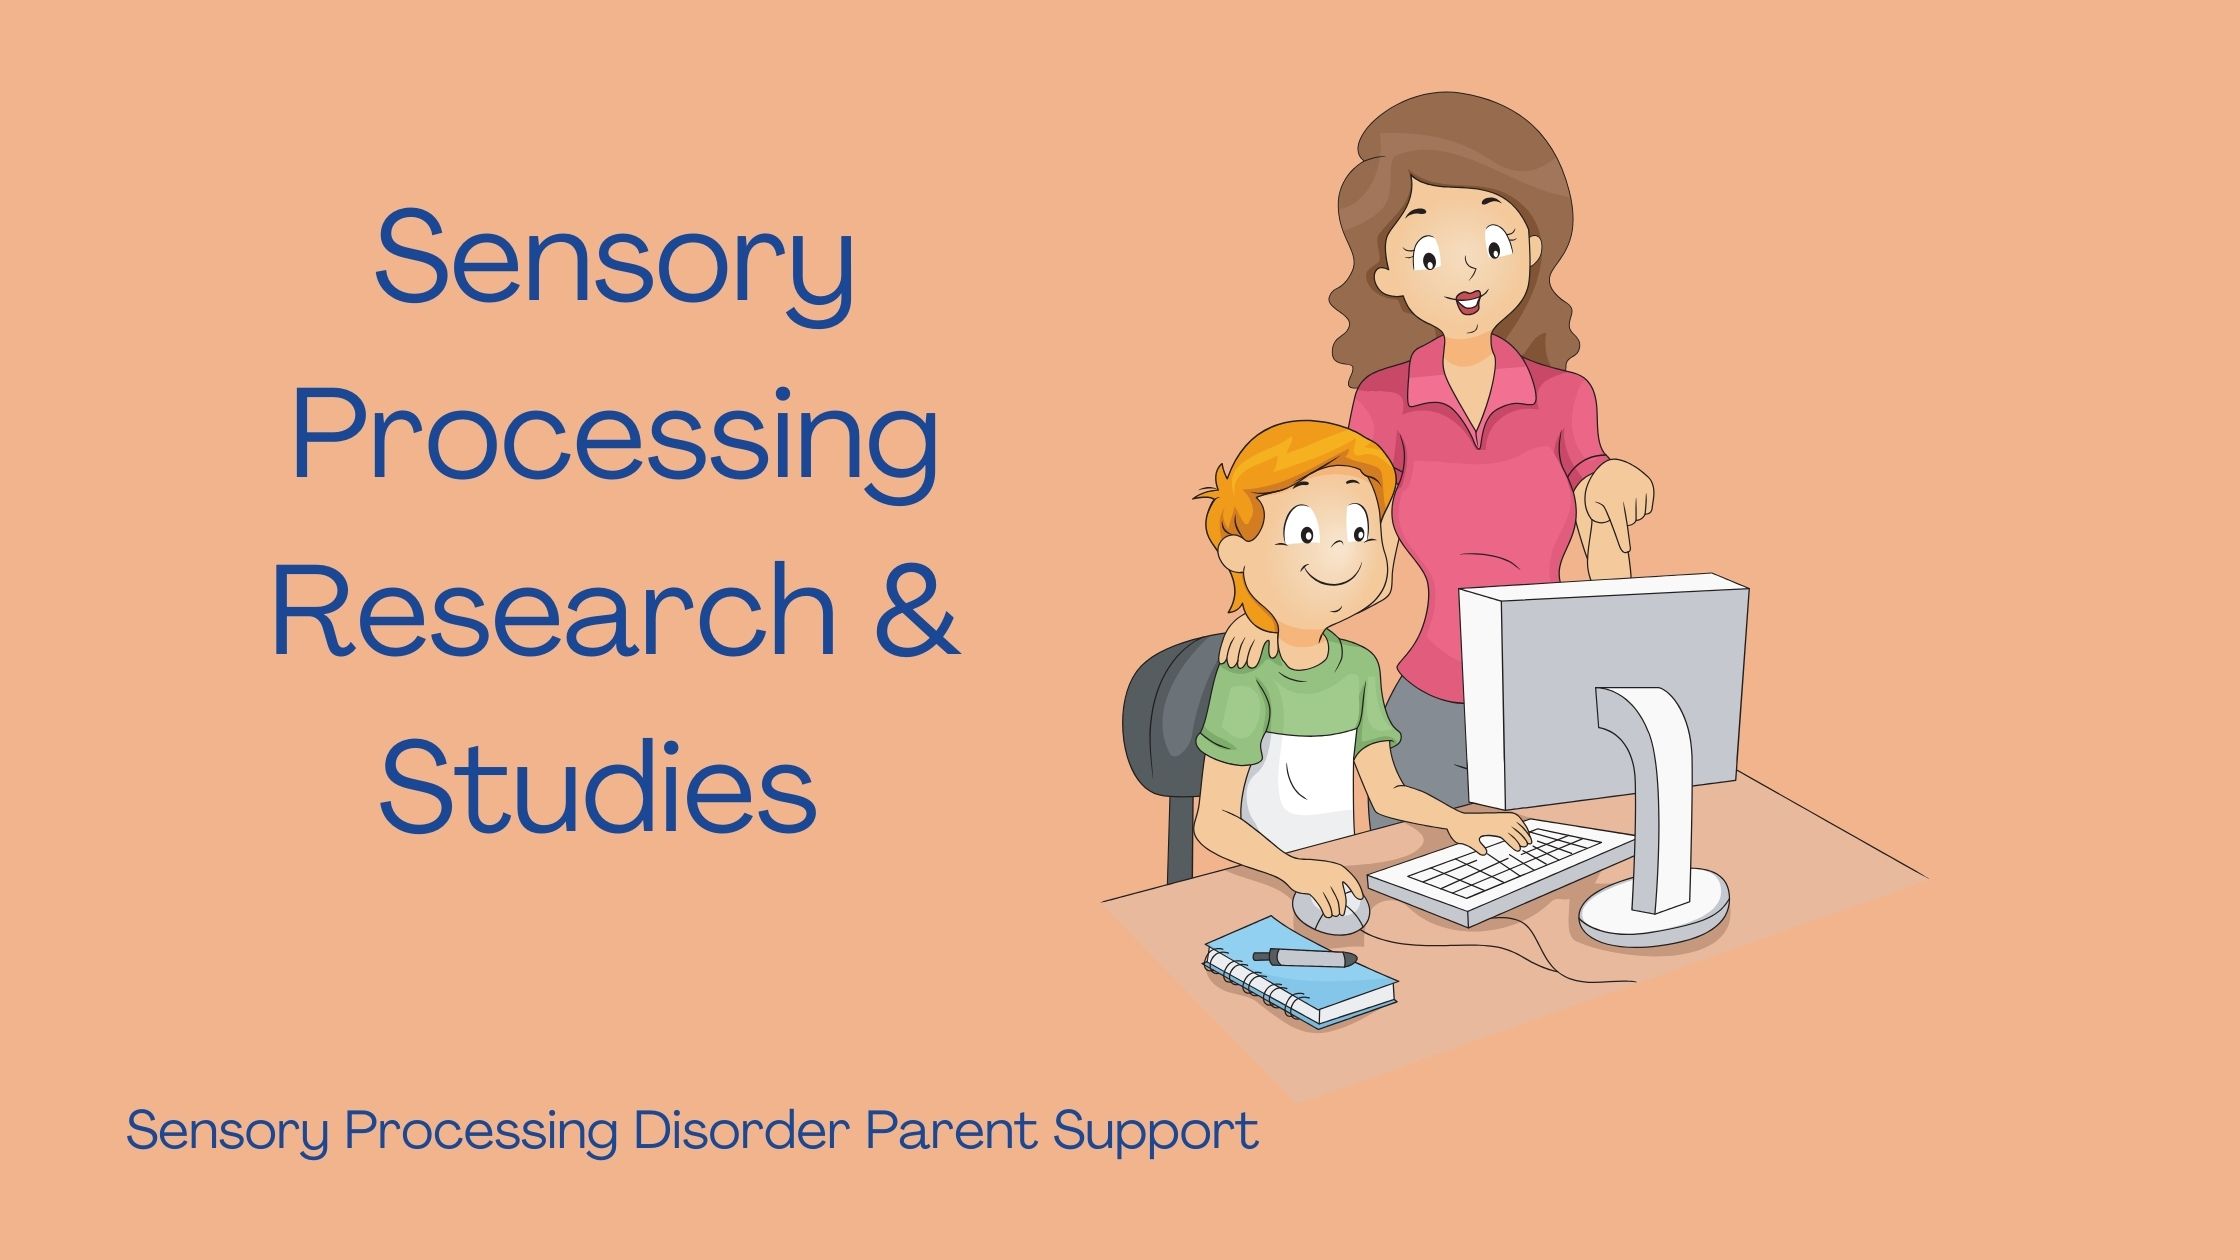 mom and child at a computer looking at studies and research for sensory processing disorder Sensory Processing Research & Studies